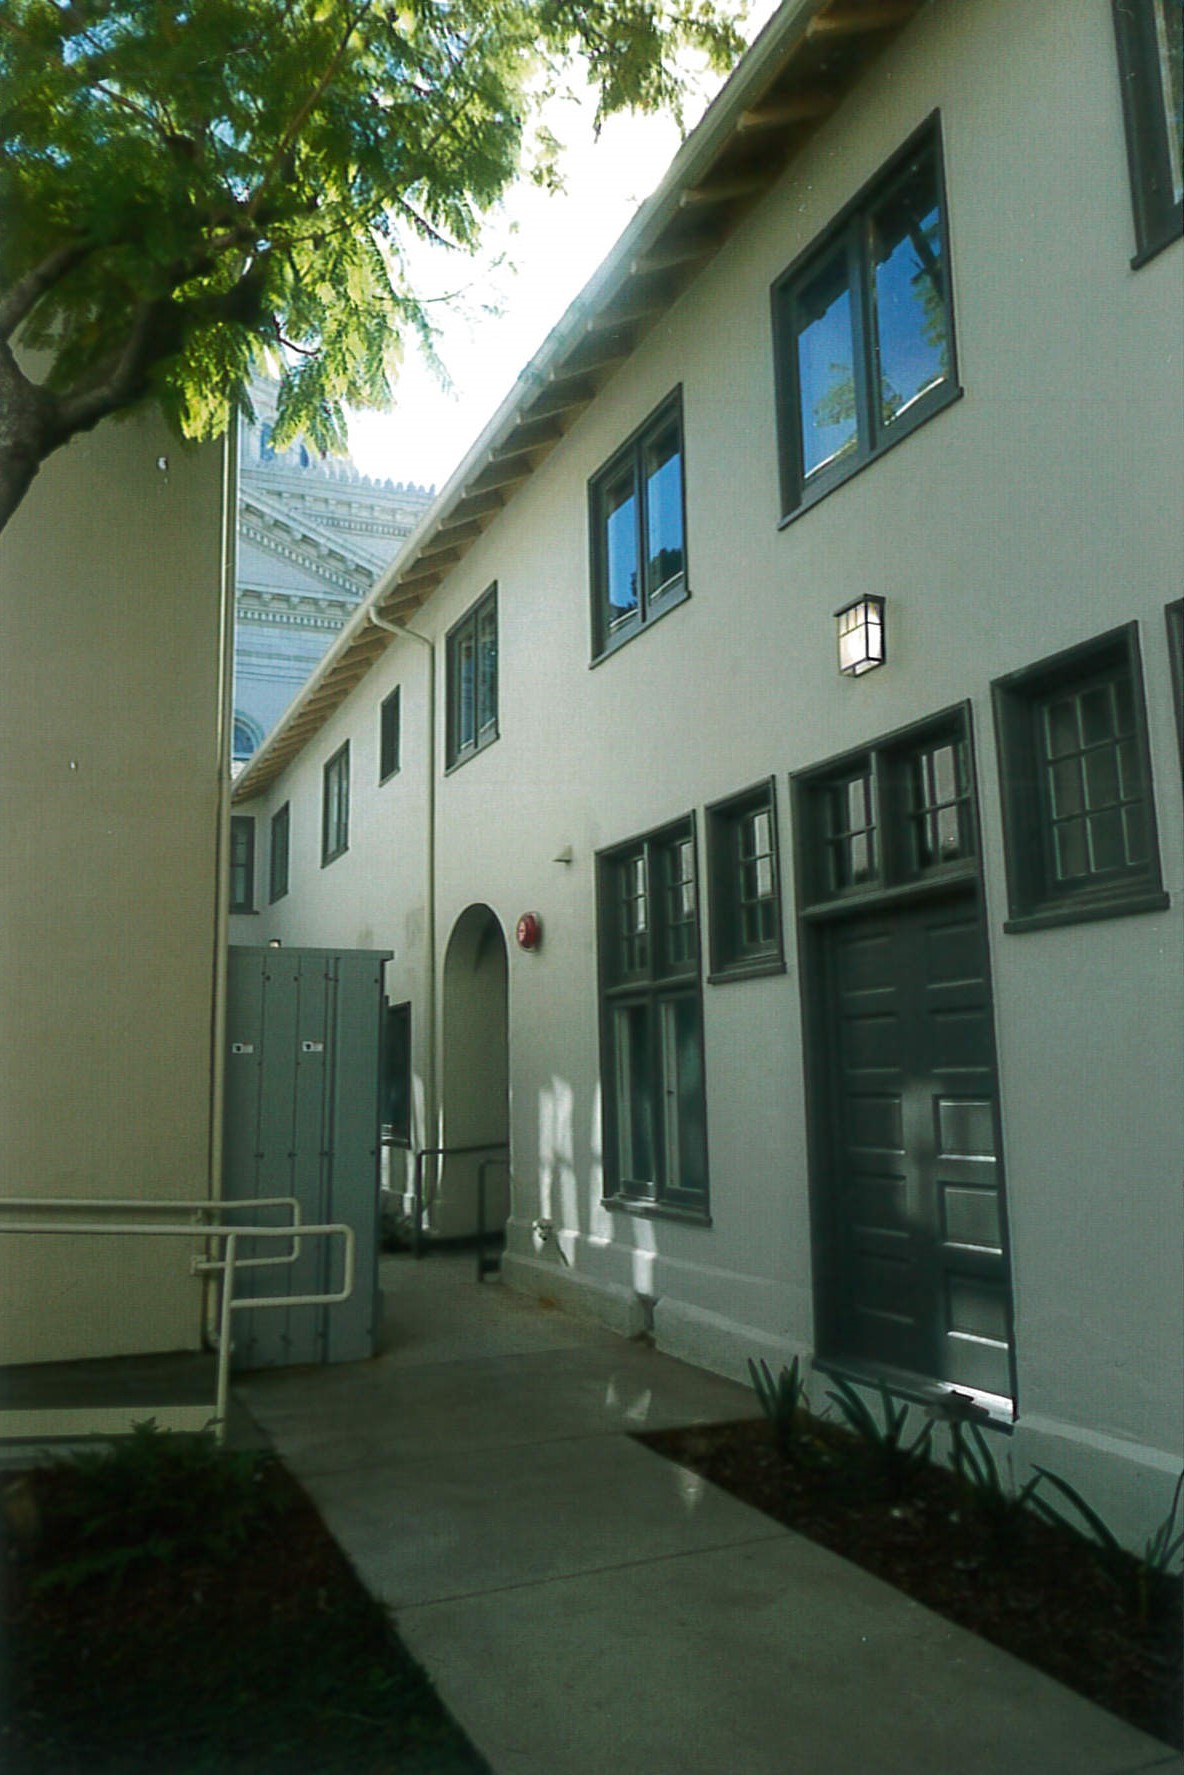 Exterior view of renovated buildings